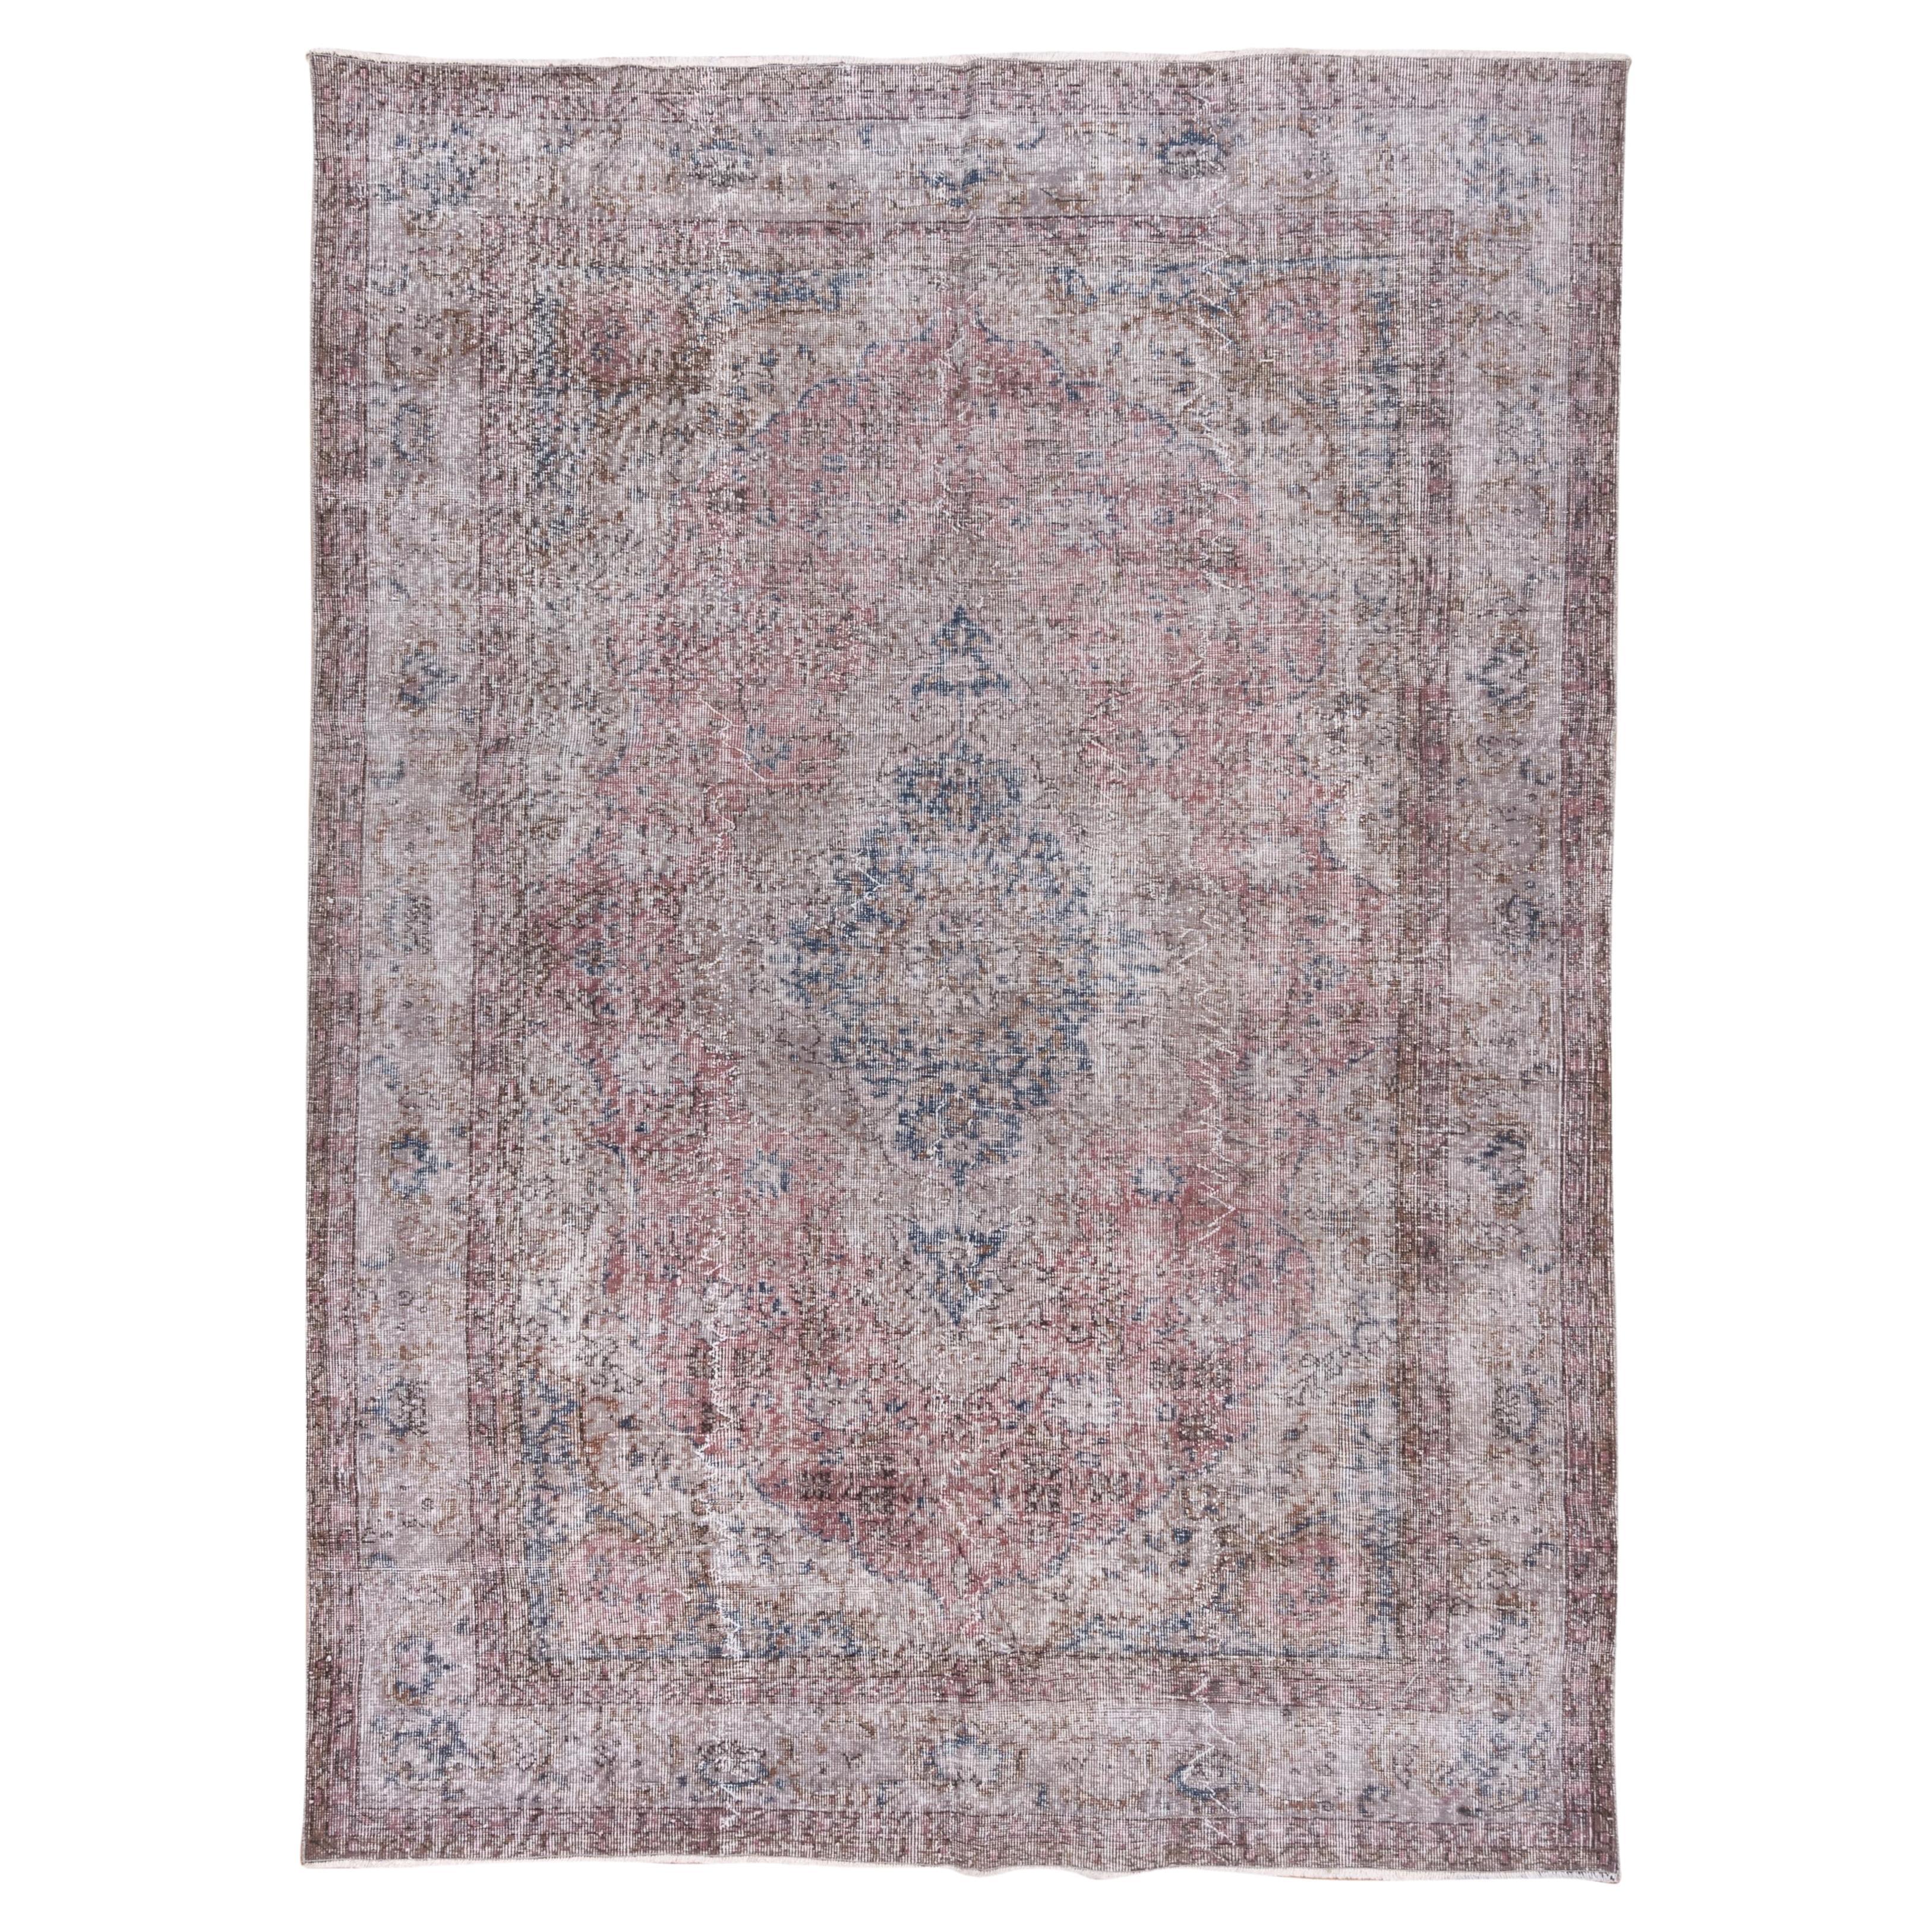 Turkish Dyed Sparta Rug in Smoke Purple - Washed Effect - 1940 For Sale